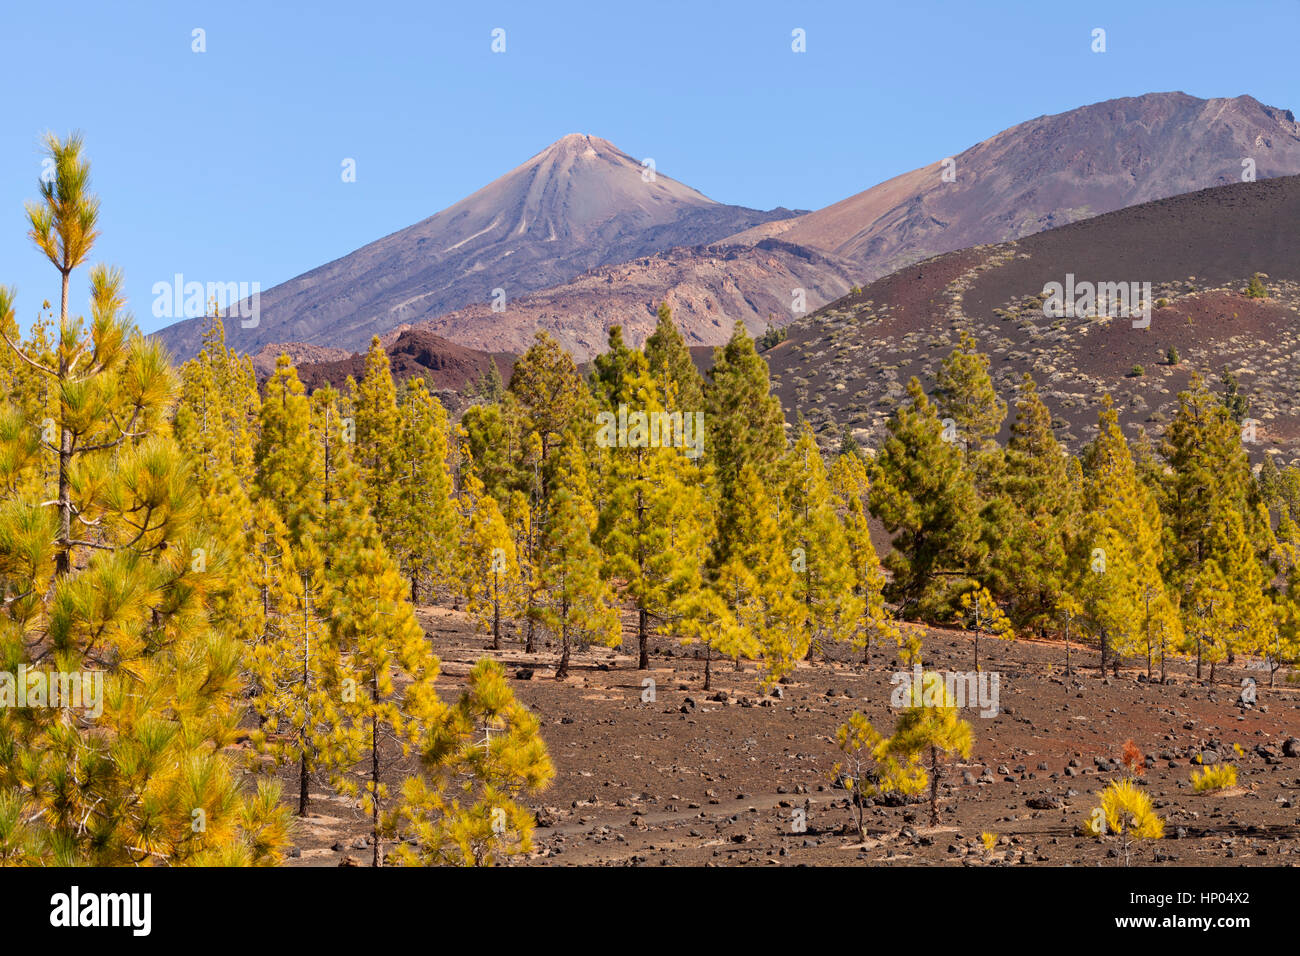 El Teide volcano with pine trees, lava rocks on its slopes in Tenerife national park, Canary islands, on a sunny summer day Stock Photo